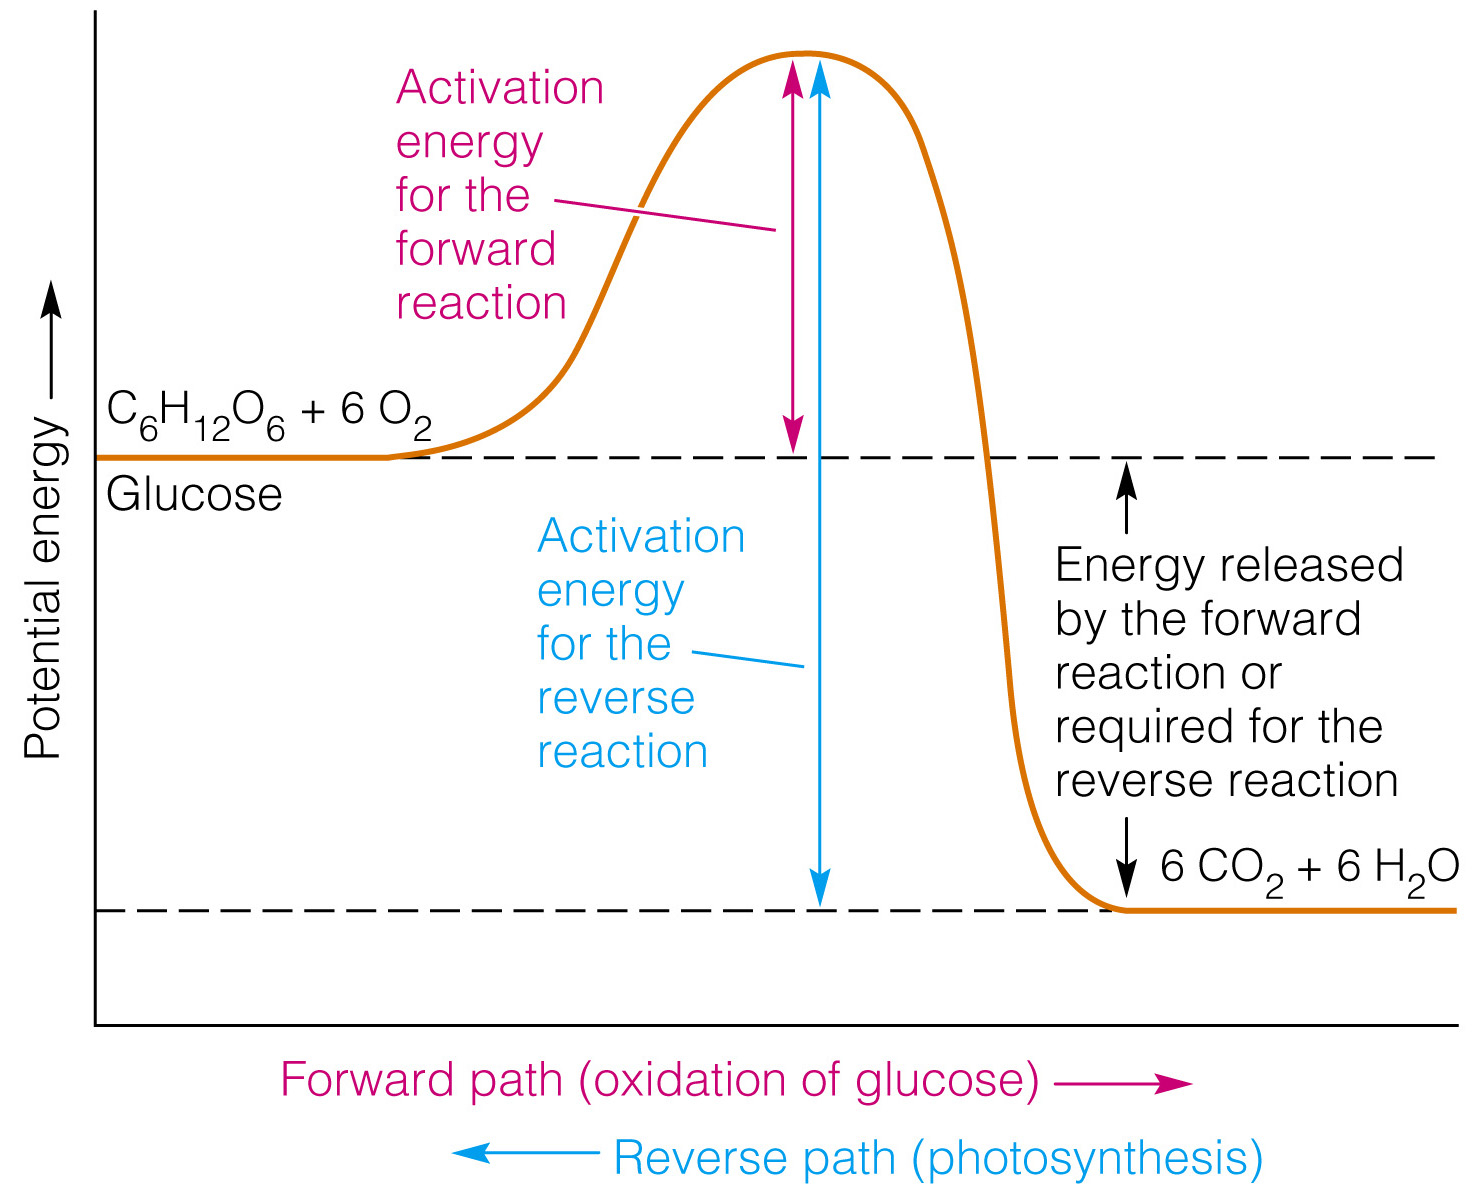 Potential Energy Diagram How Can I Represent An Exothermic Reaction In A Potential Energy